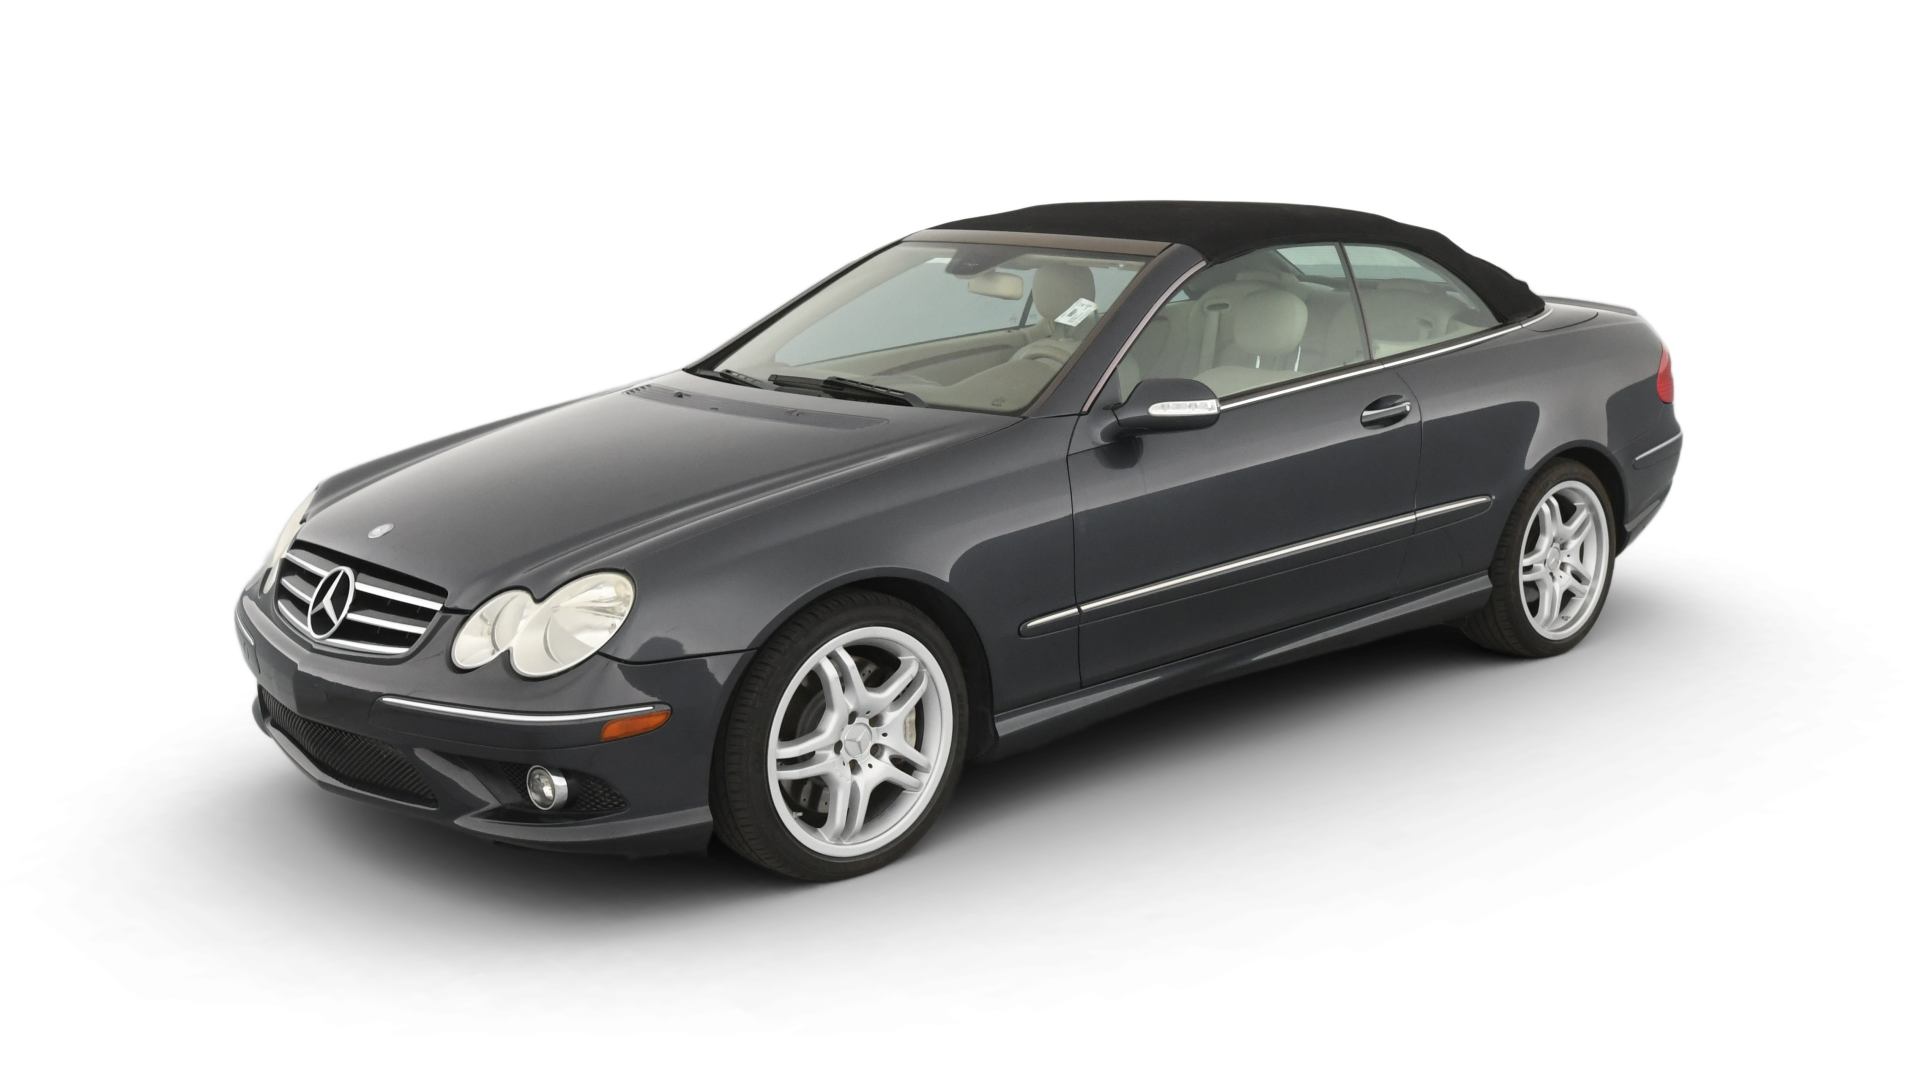 Used 2009 Mercedes-Benz CLK-Class For Sale Online | Carvana